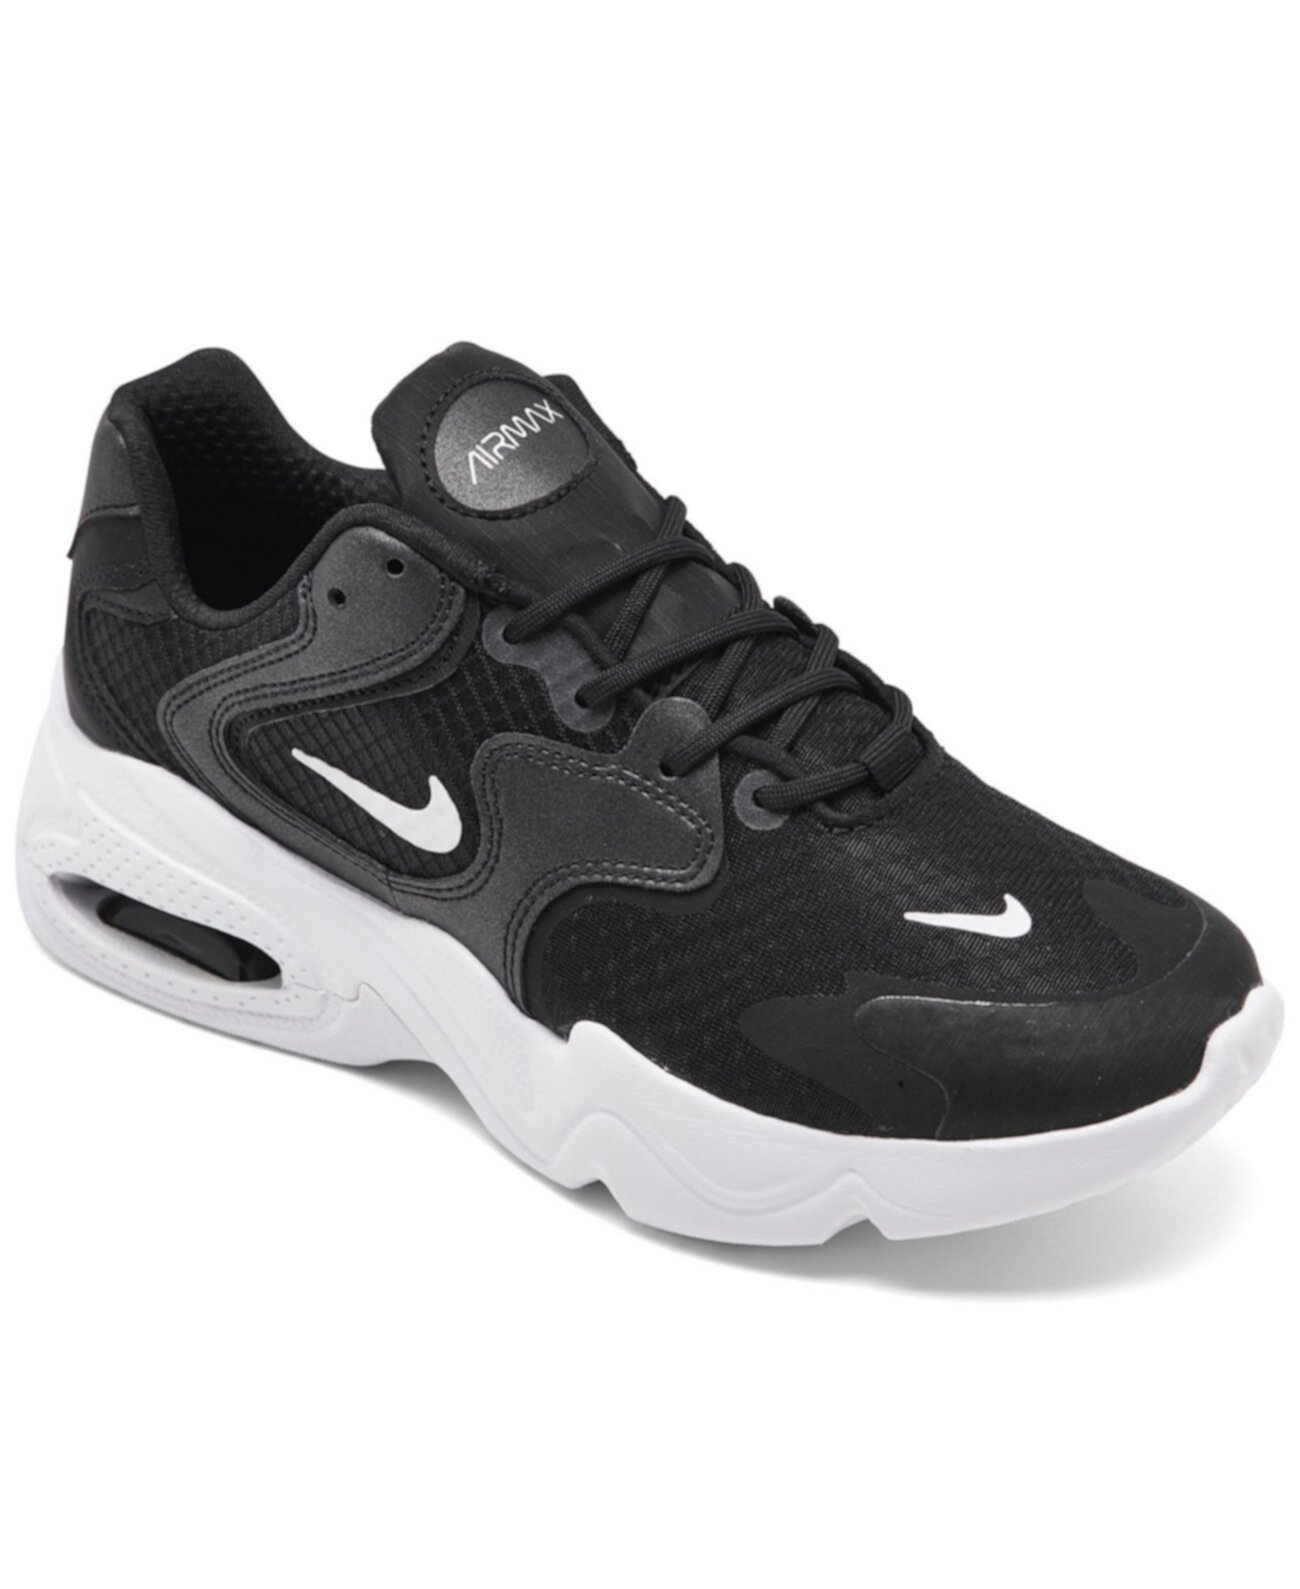 nike women's air max 2x casual sneakers from finish line